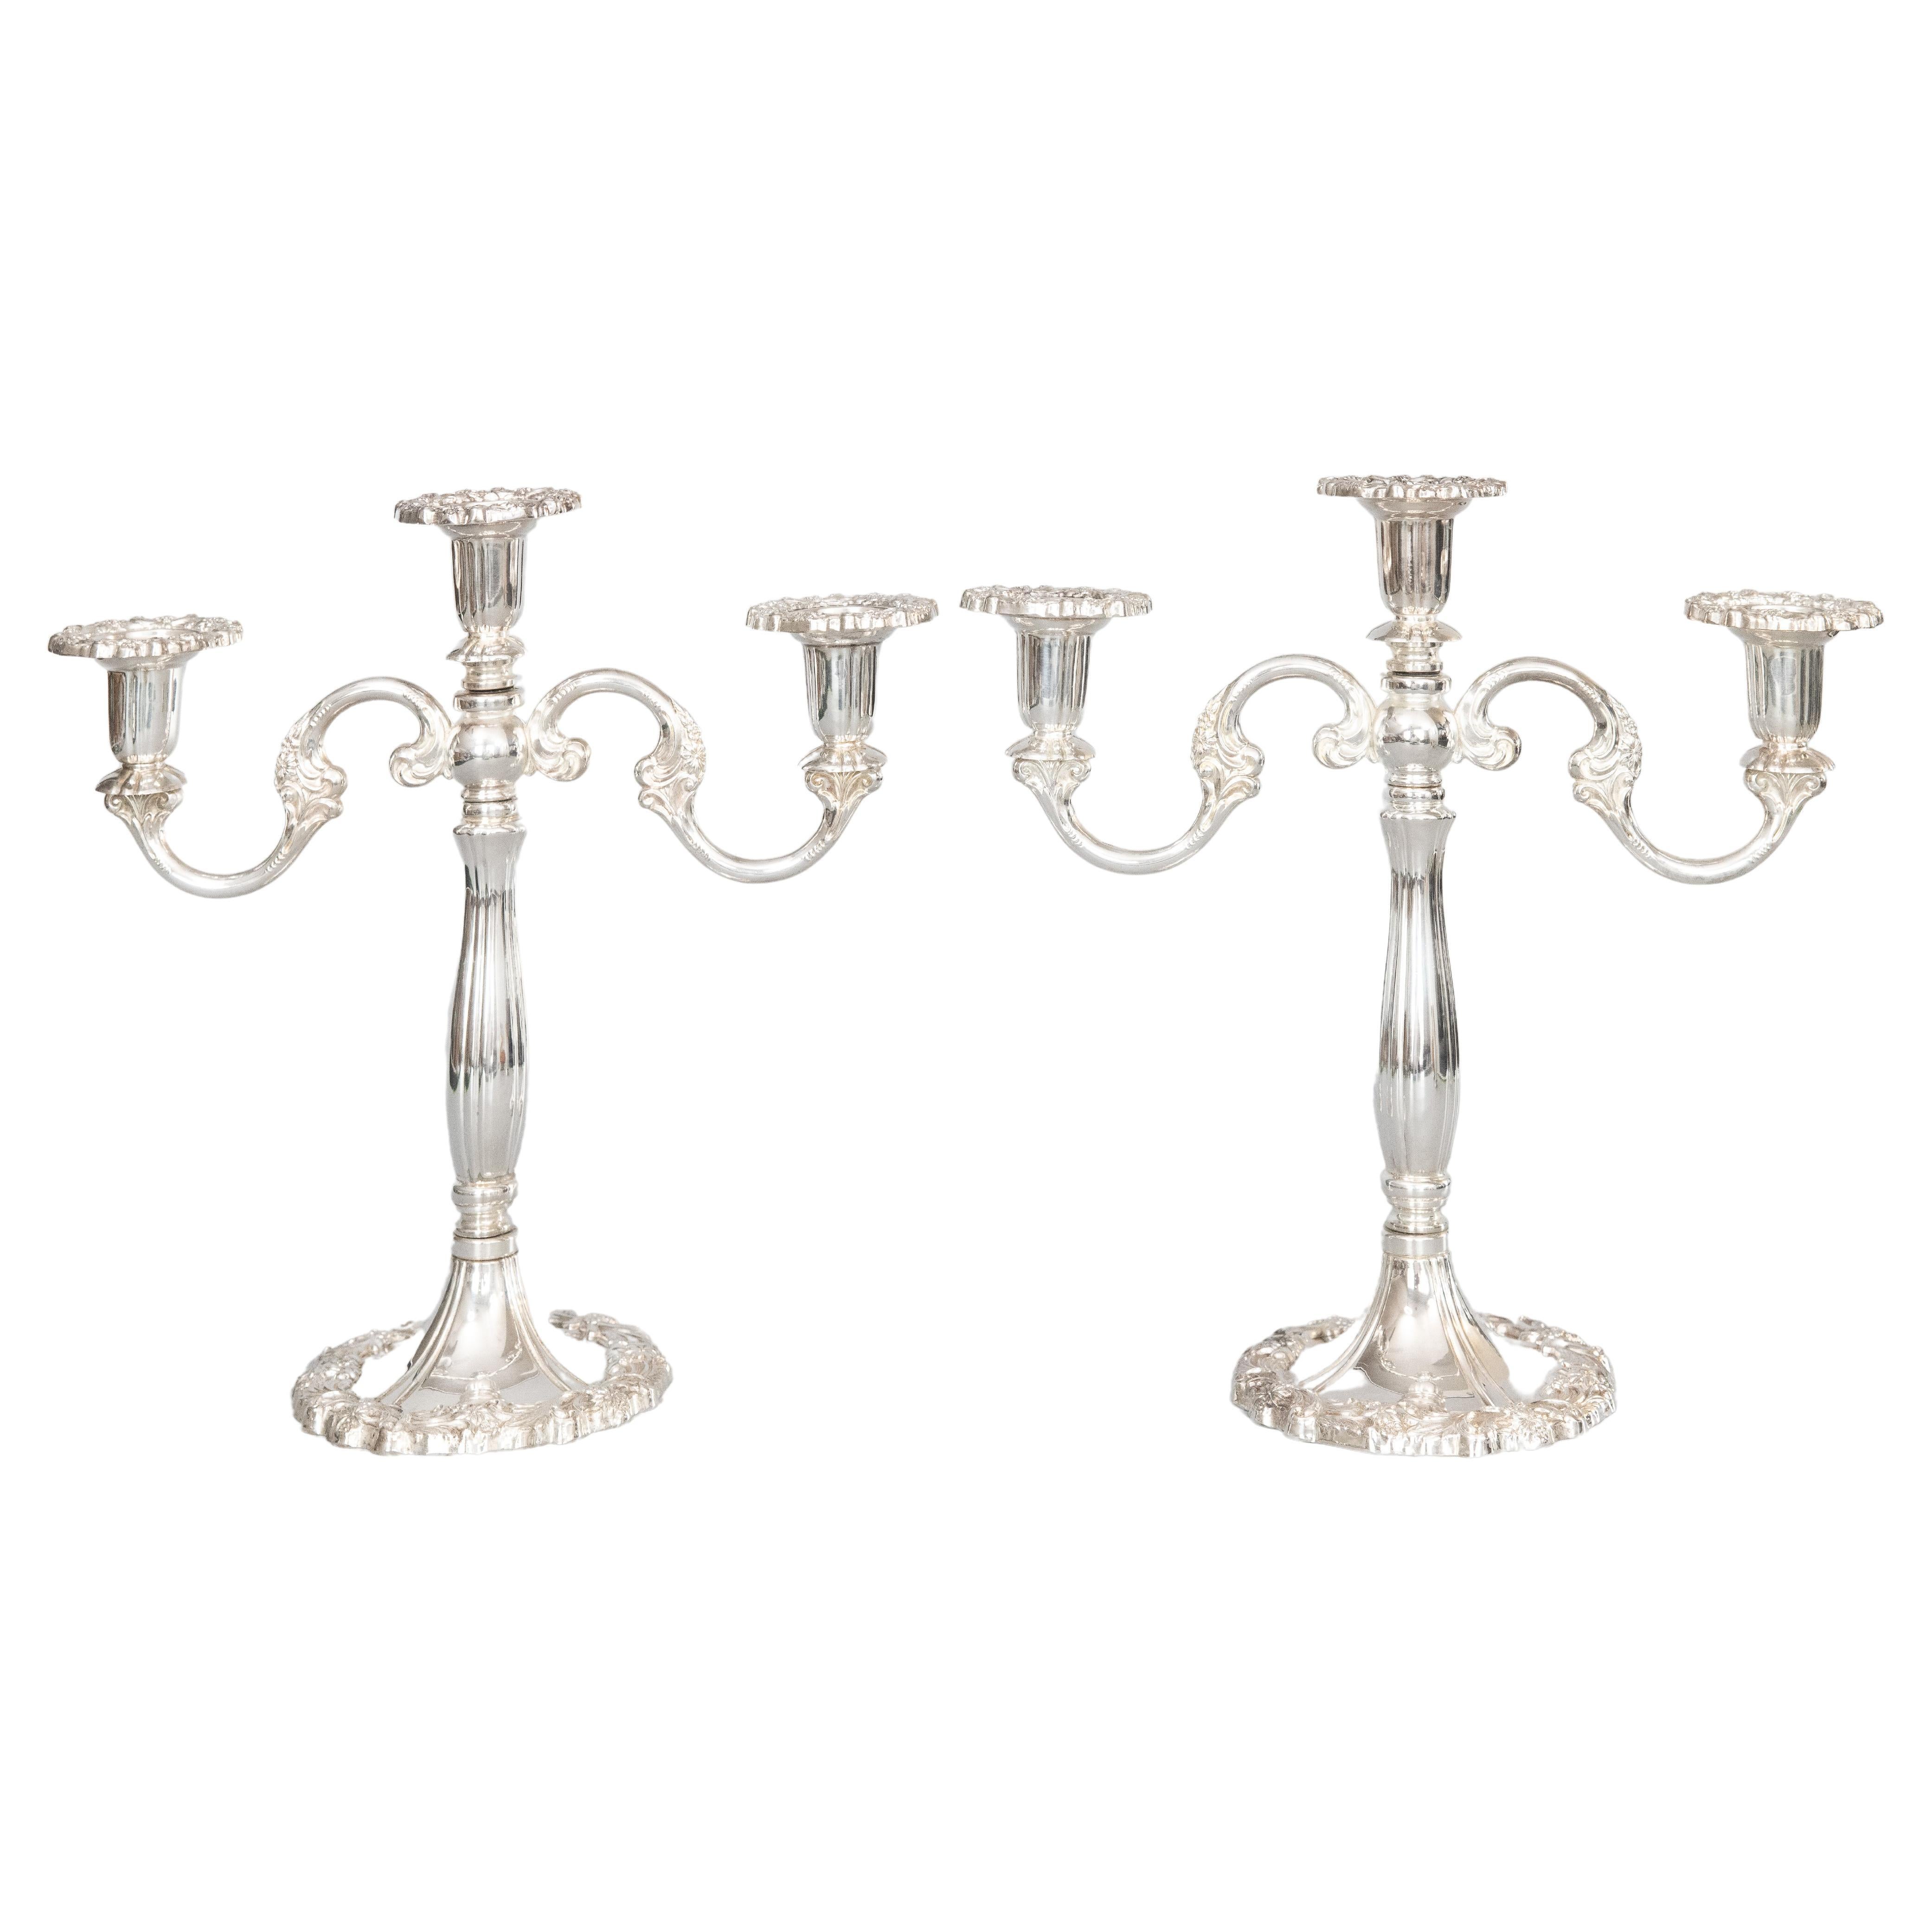 Pair of Mid 20th Century Italian Silver Plate Candelabras For Sale